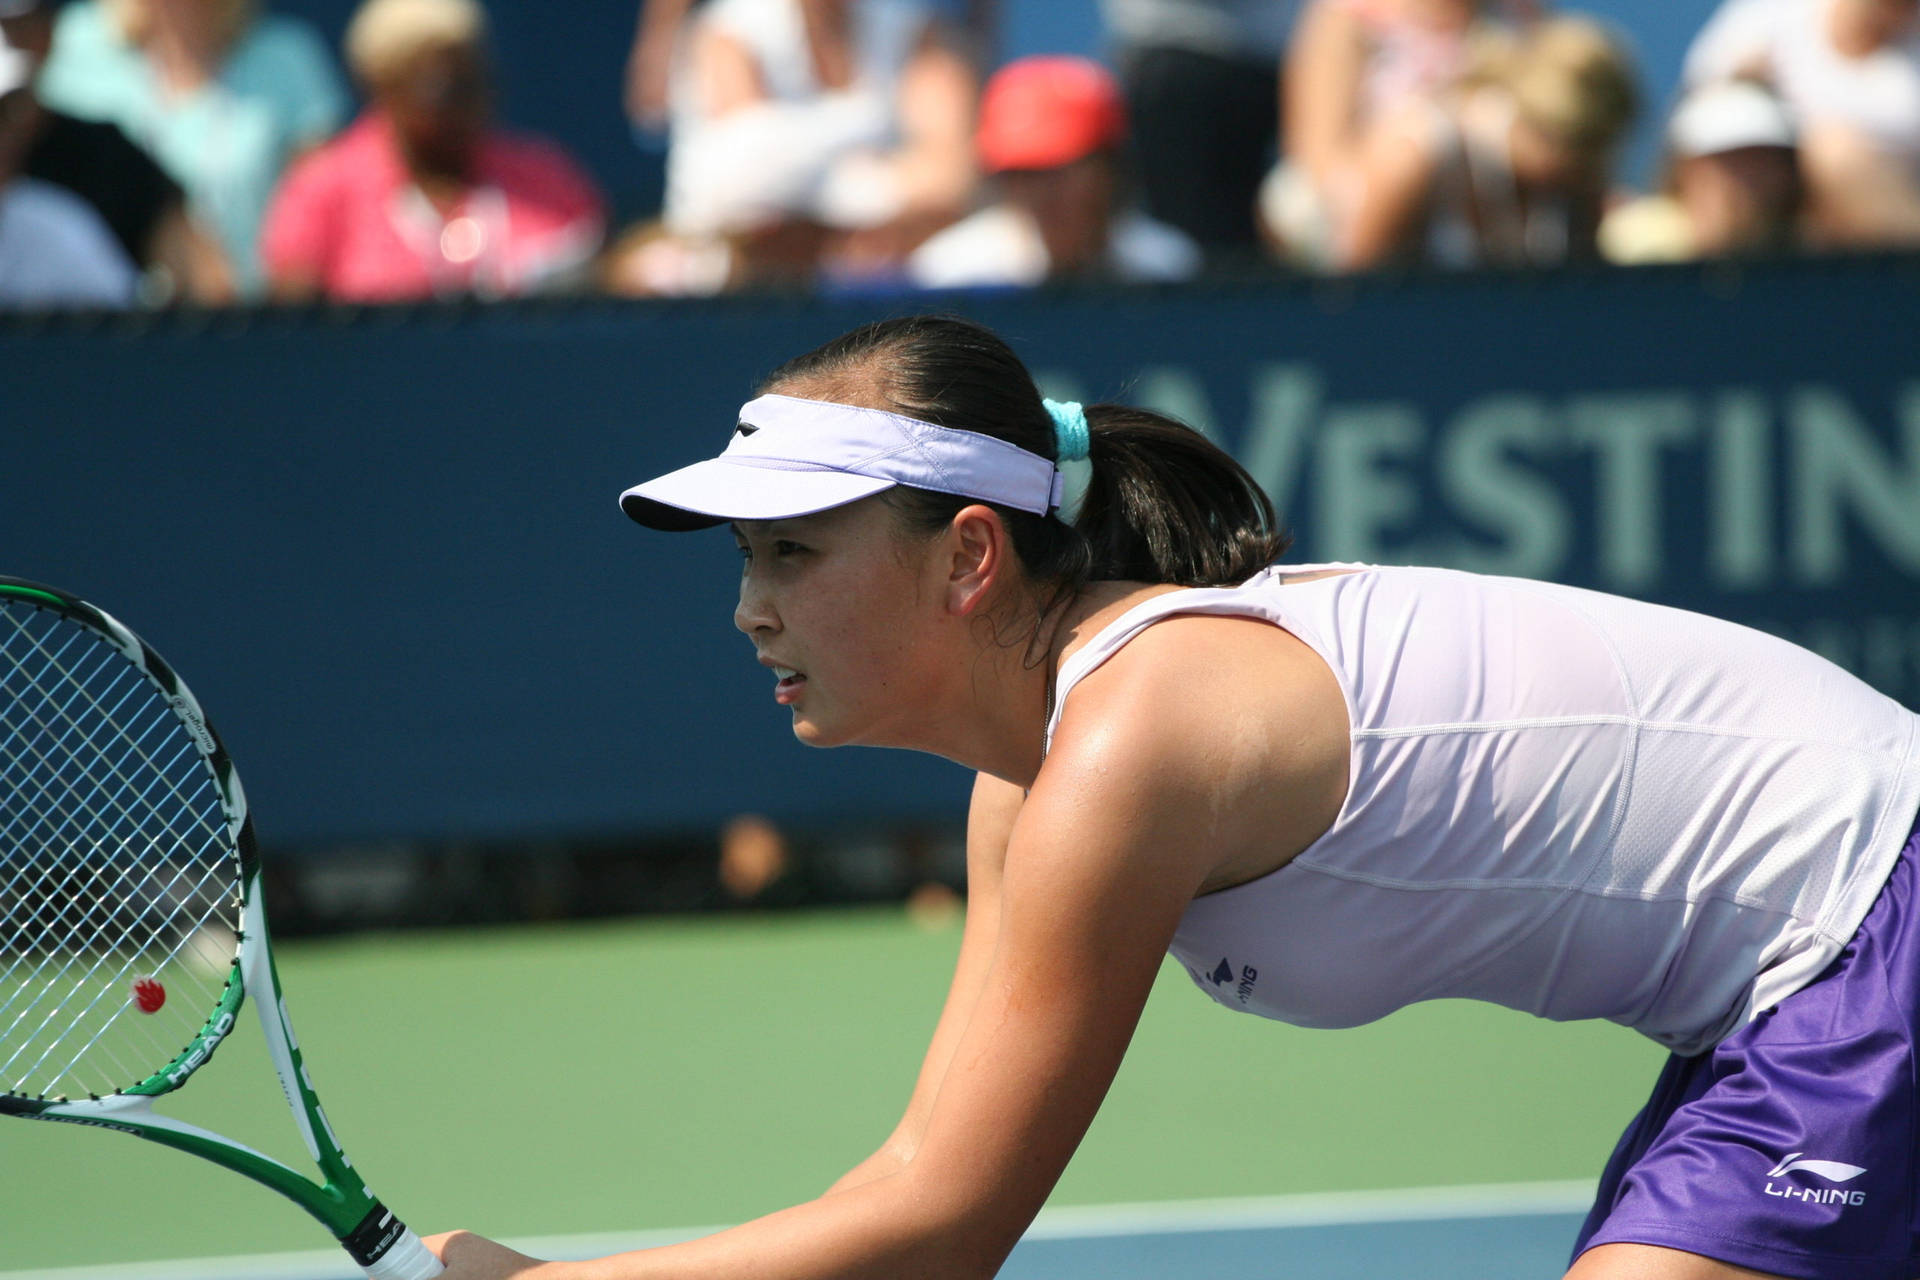 Shuai Peng Demonstrating Concentration and Agility in a Tennis Match Wallpaper